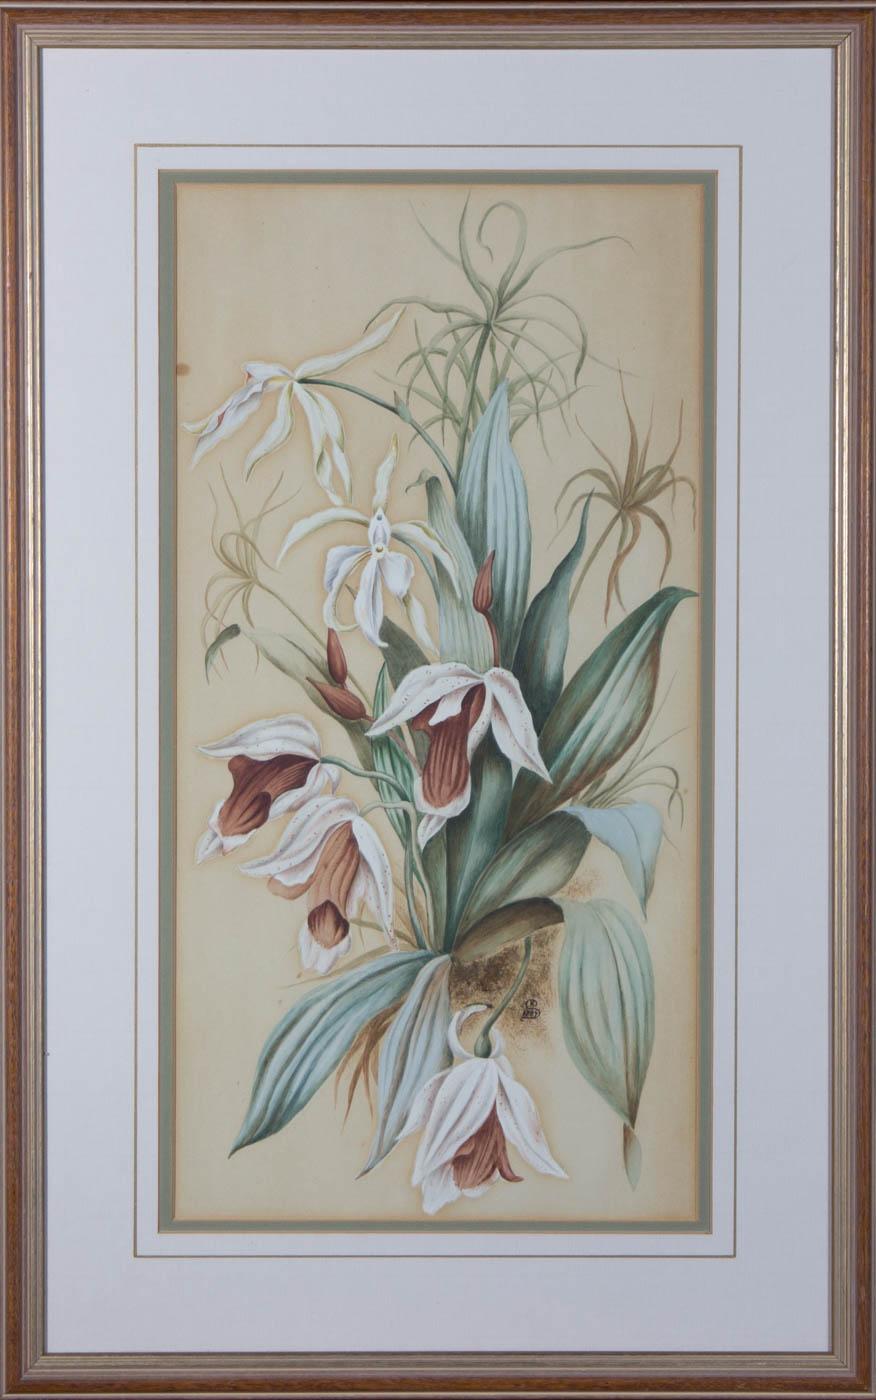 A fine watercolour and gouache flower study, monogrammed 'K.S.' and dated '1889' to the lower right-hand quadrant. Well-presented in a double washline card mount and in a wooden frame with golden detail. On wove.